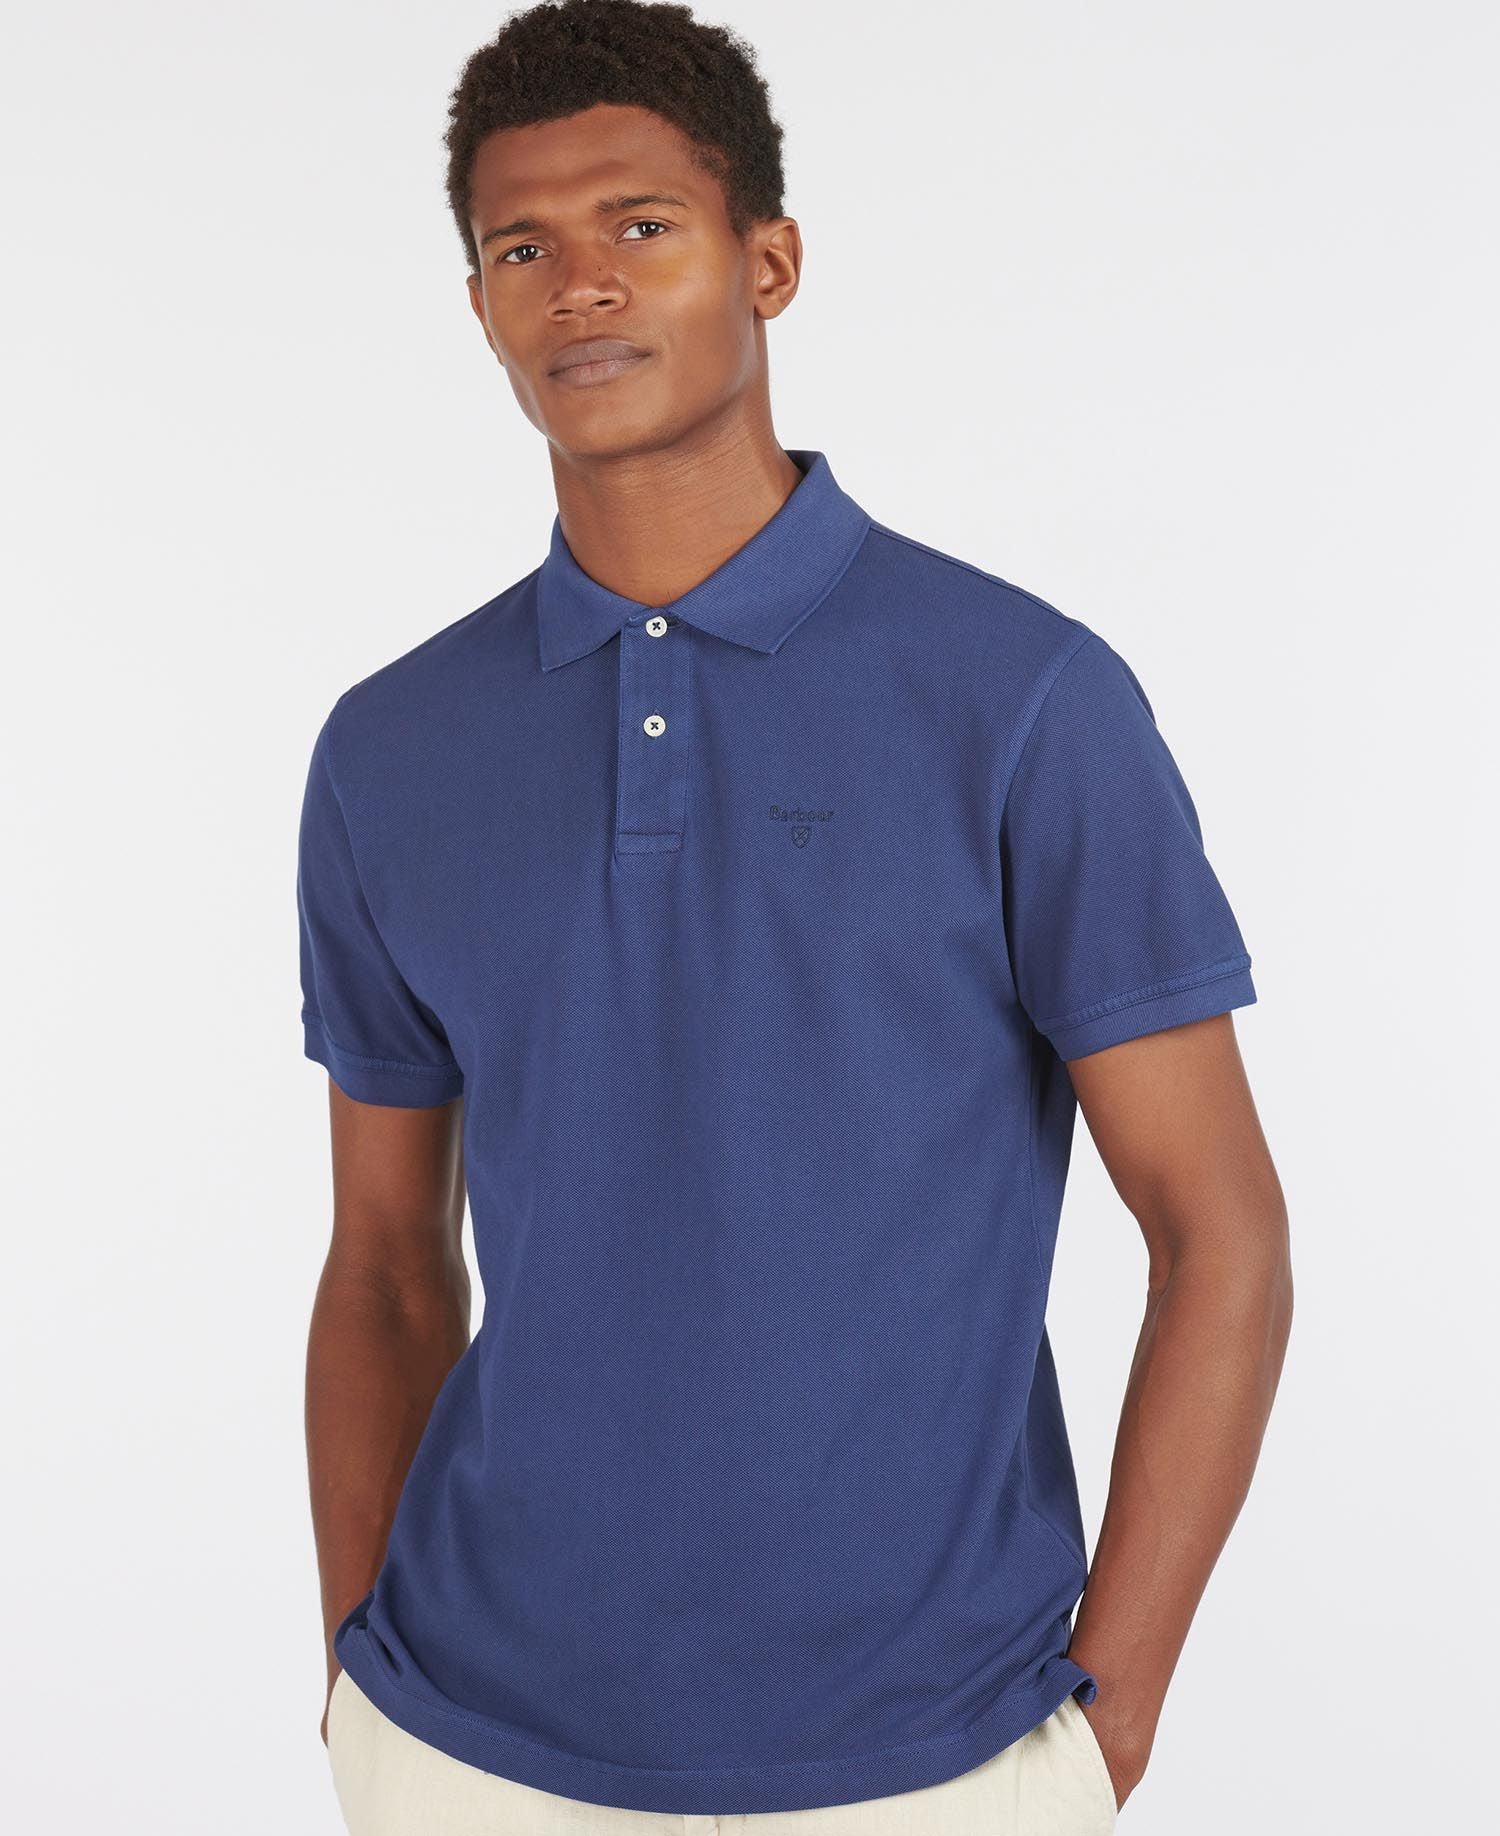 Men's Washed Sports Polo - Navy